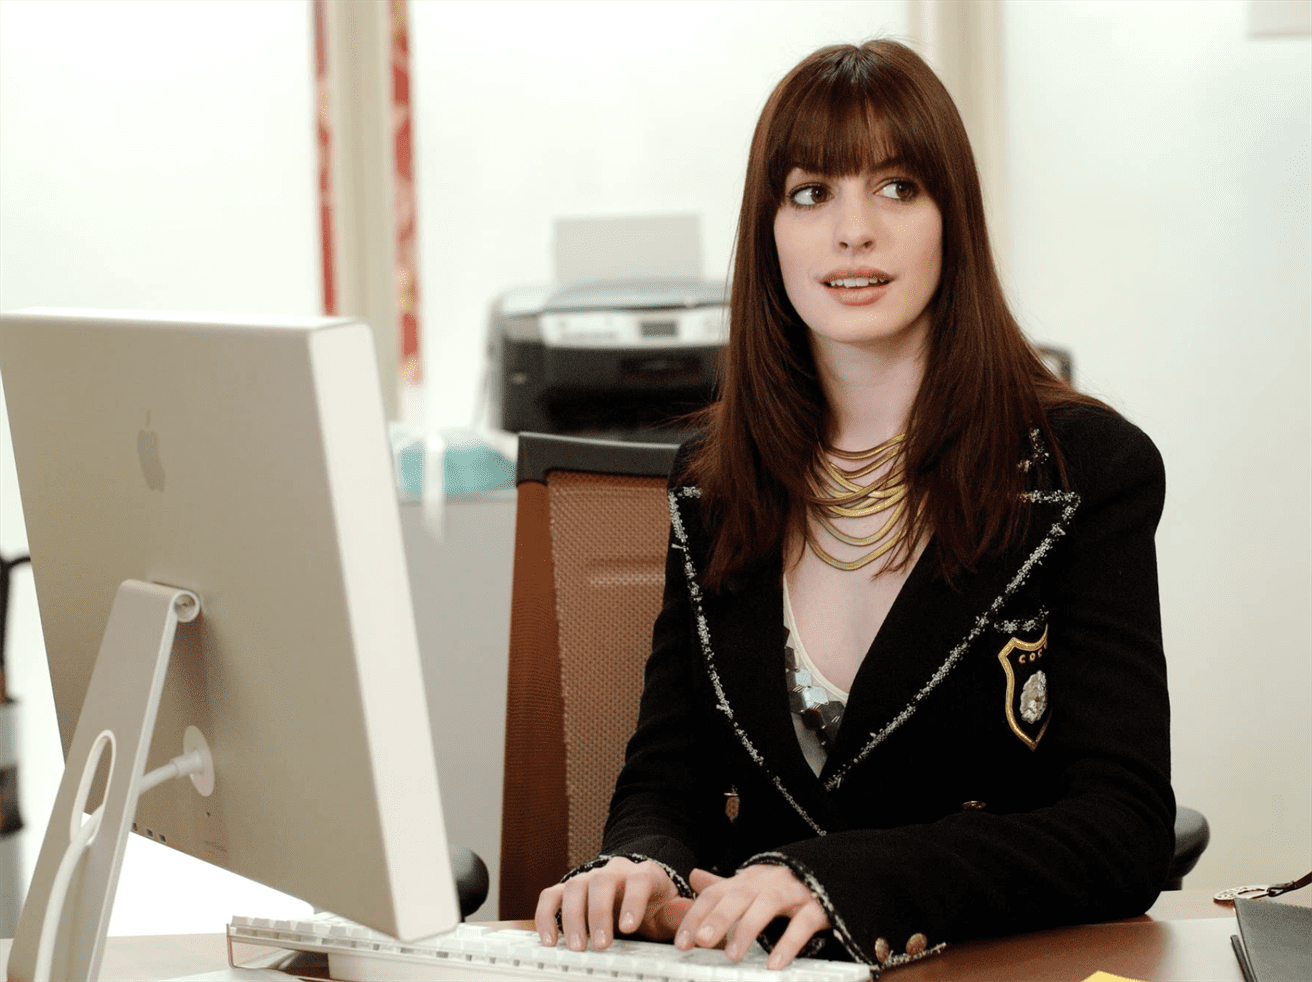 “Devil Wears Prada” is a staple for a preppy twist on business wear, street and office style. Photo courtesy of 20th Century Fox